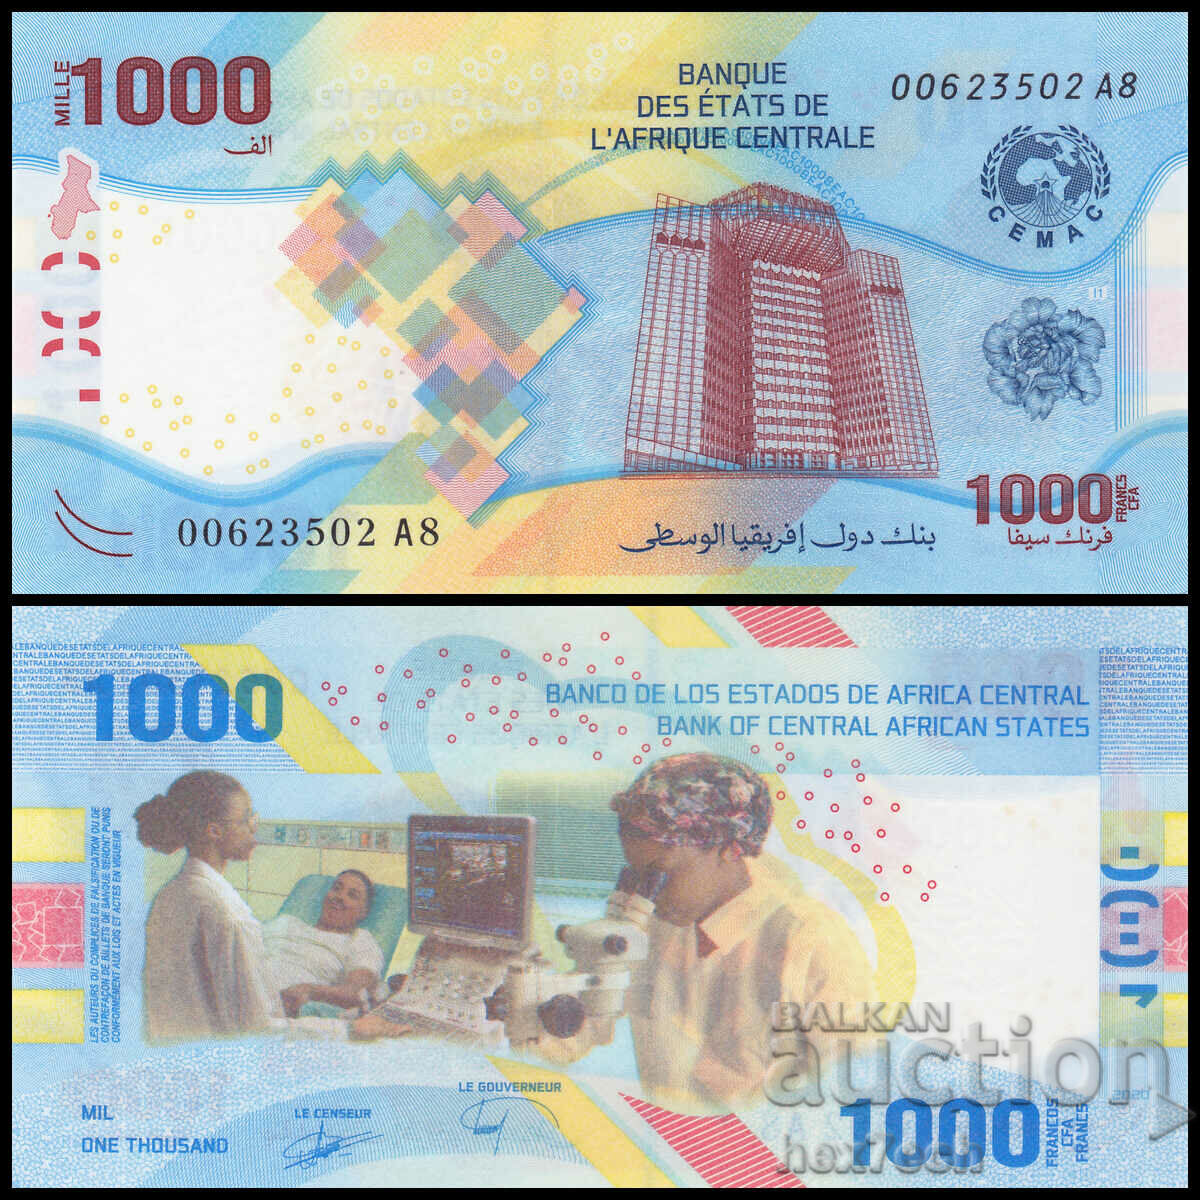 ❤️ ⭐ Central Africa 2020 1000 franc polymer UNC new ⭐ ❤️